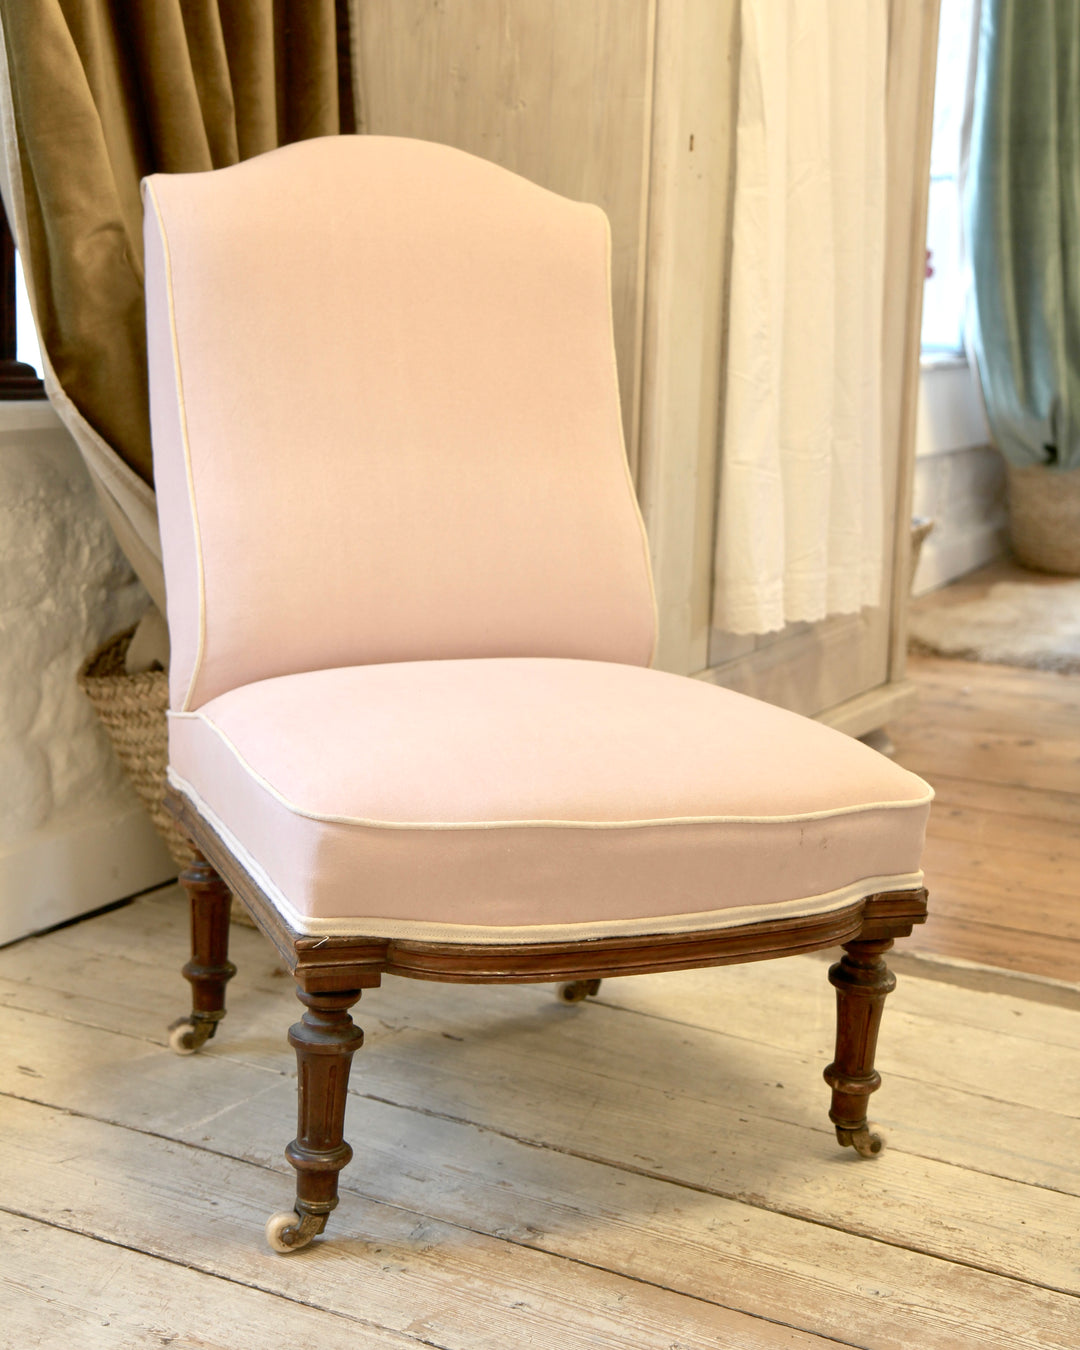 vintage nursing chair upholstered in pink fabric